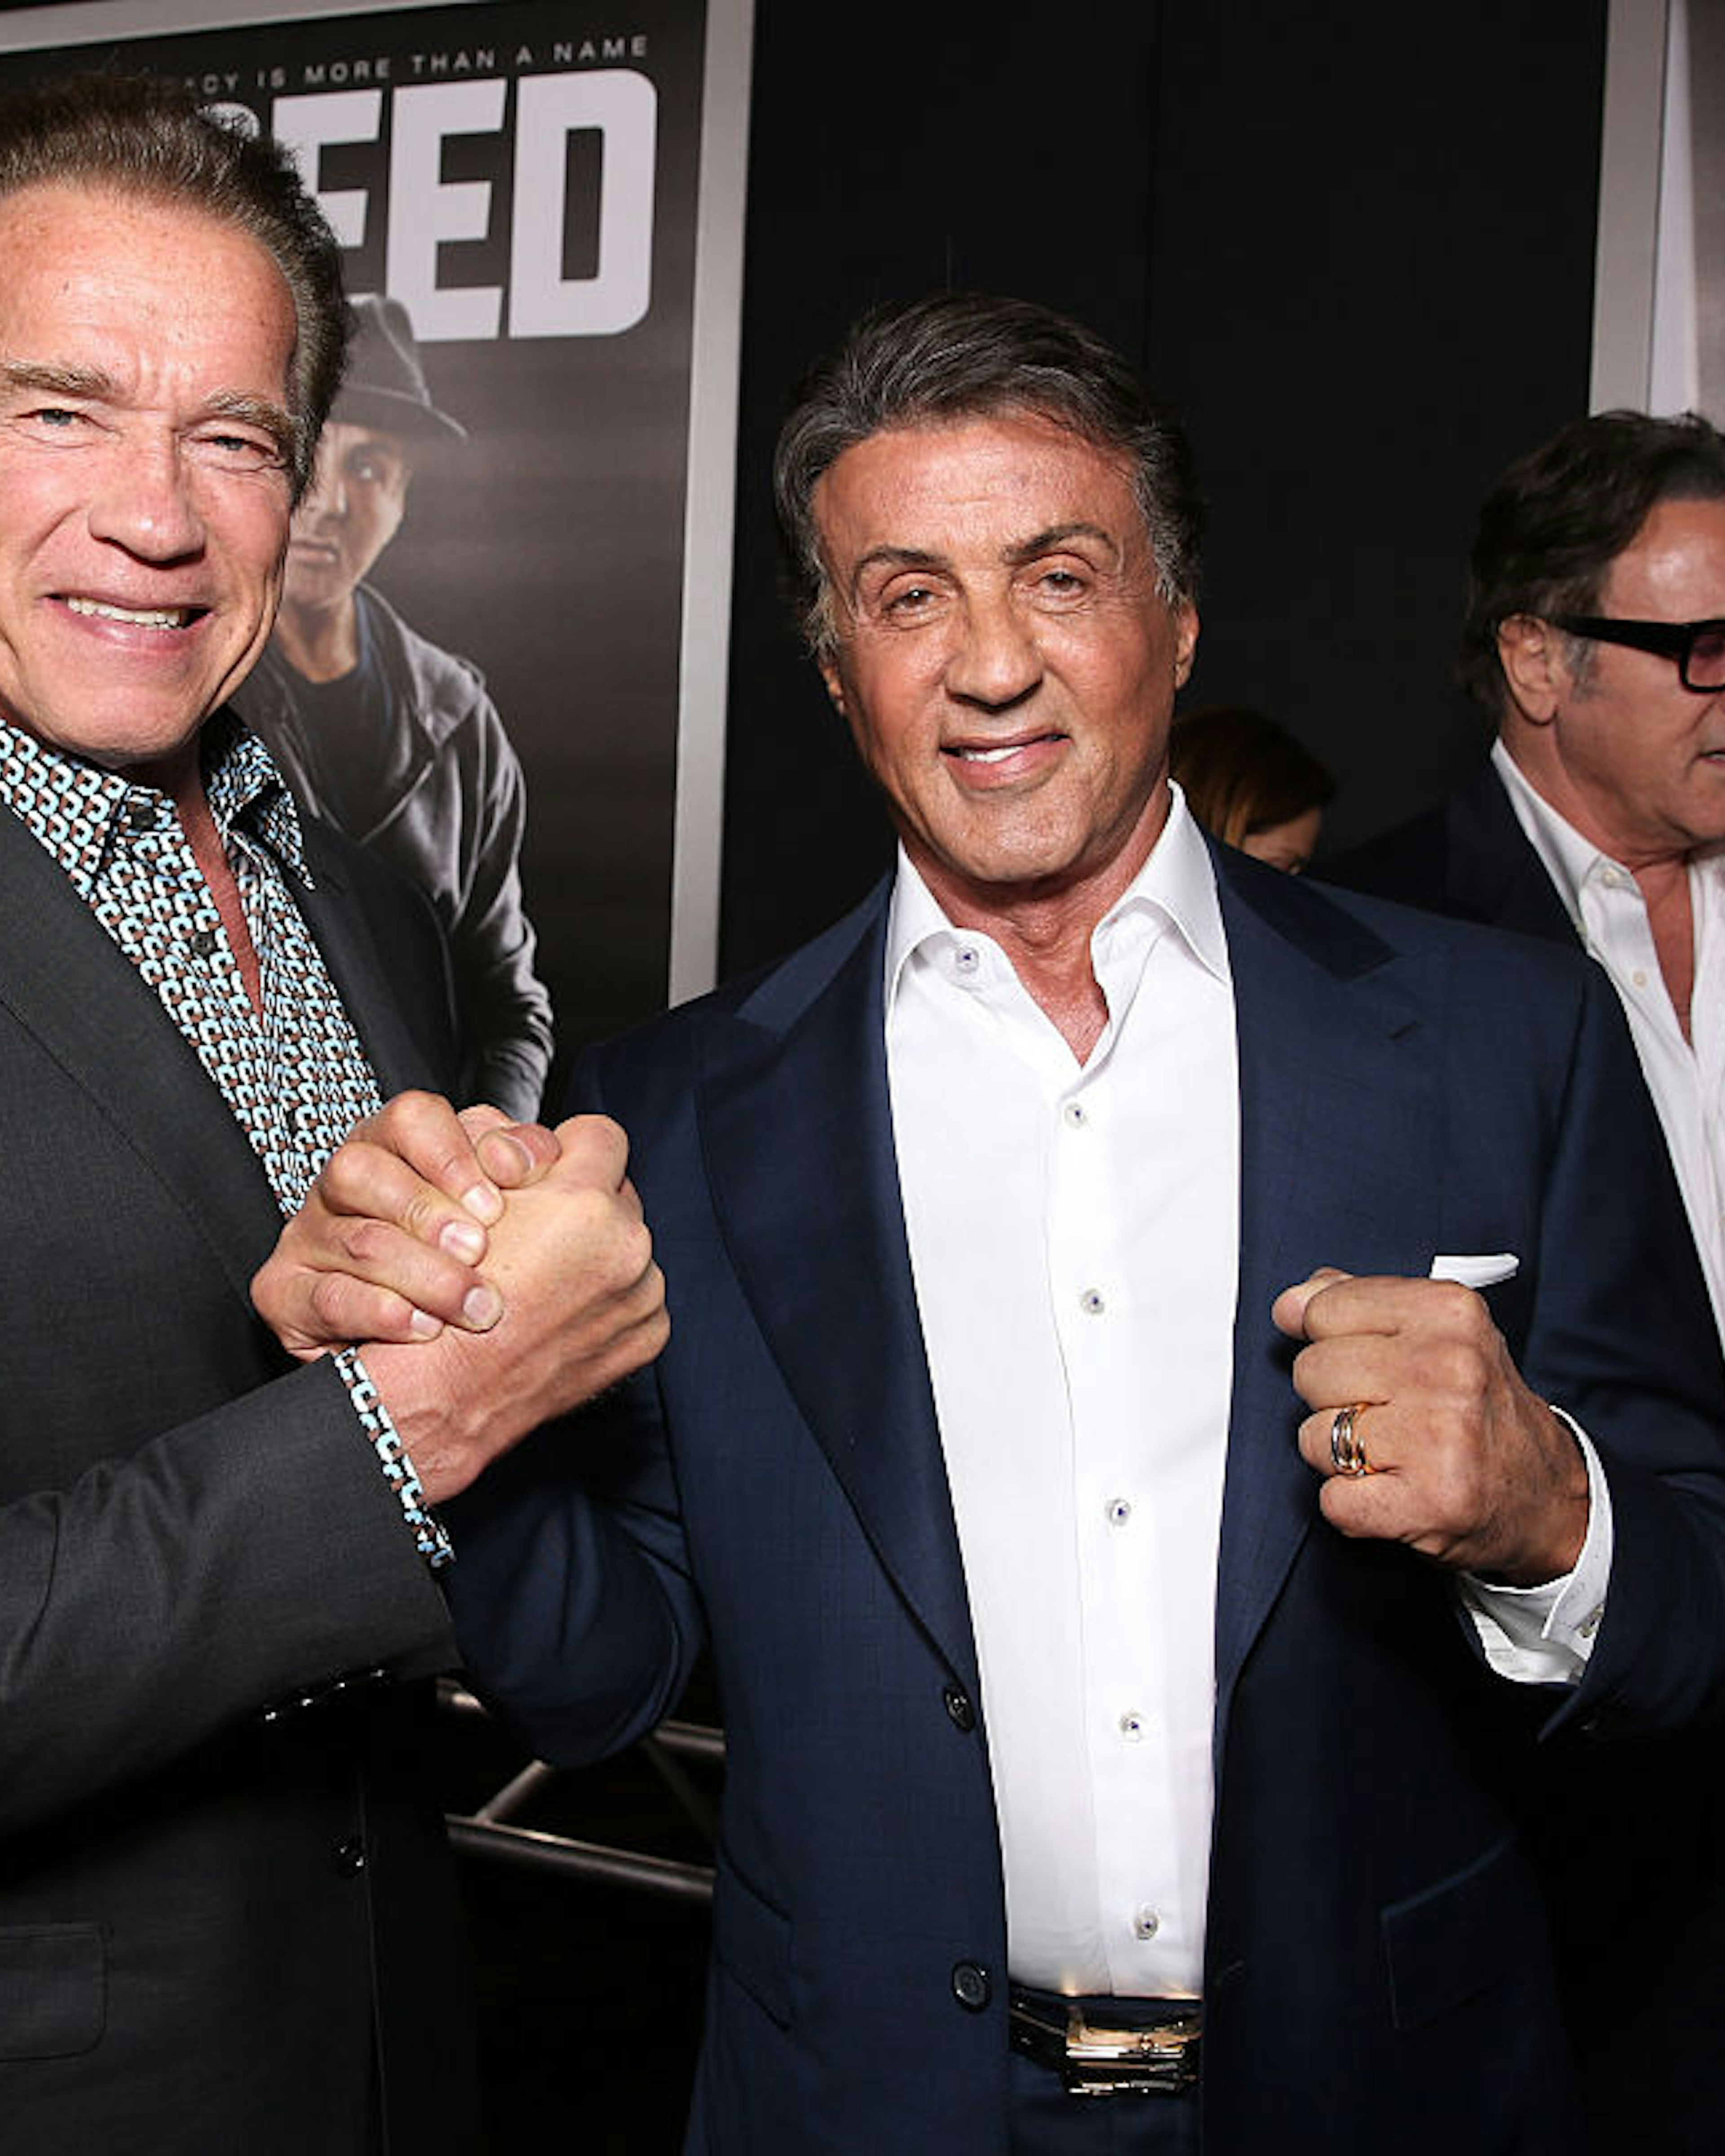 WESTWOOD, CA - NOVEMBER 19: Arnold Schwarzenegger (L) and Producer Sylvester Stallone attend the premiere of Warner Bros. Pictures' "Creed" at Regency Village Theatre on November 19, 2015 in Westwood, California. (Photo by Todd Williamson/Getty Images)